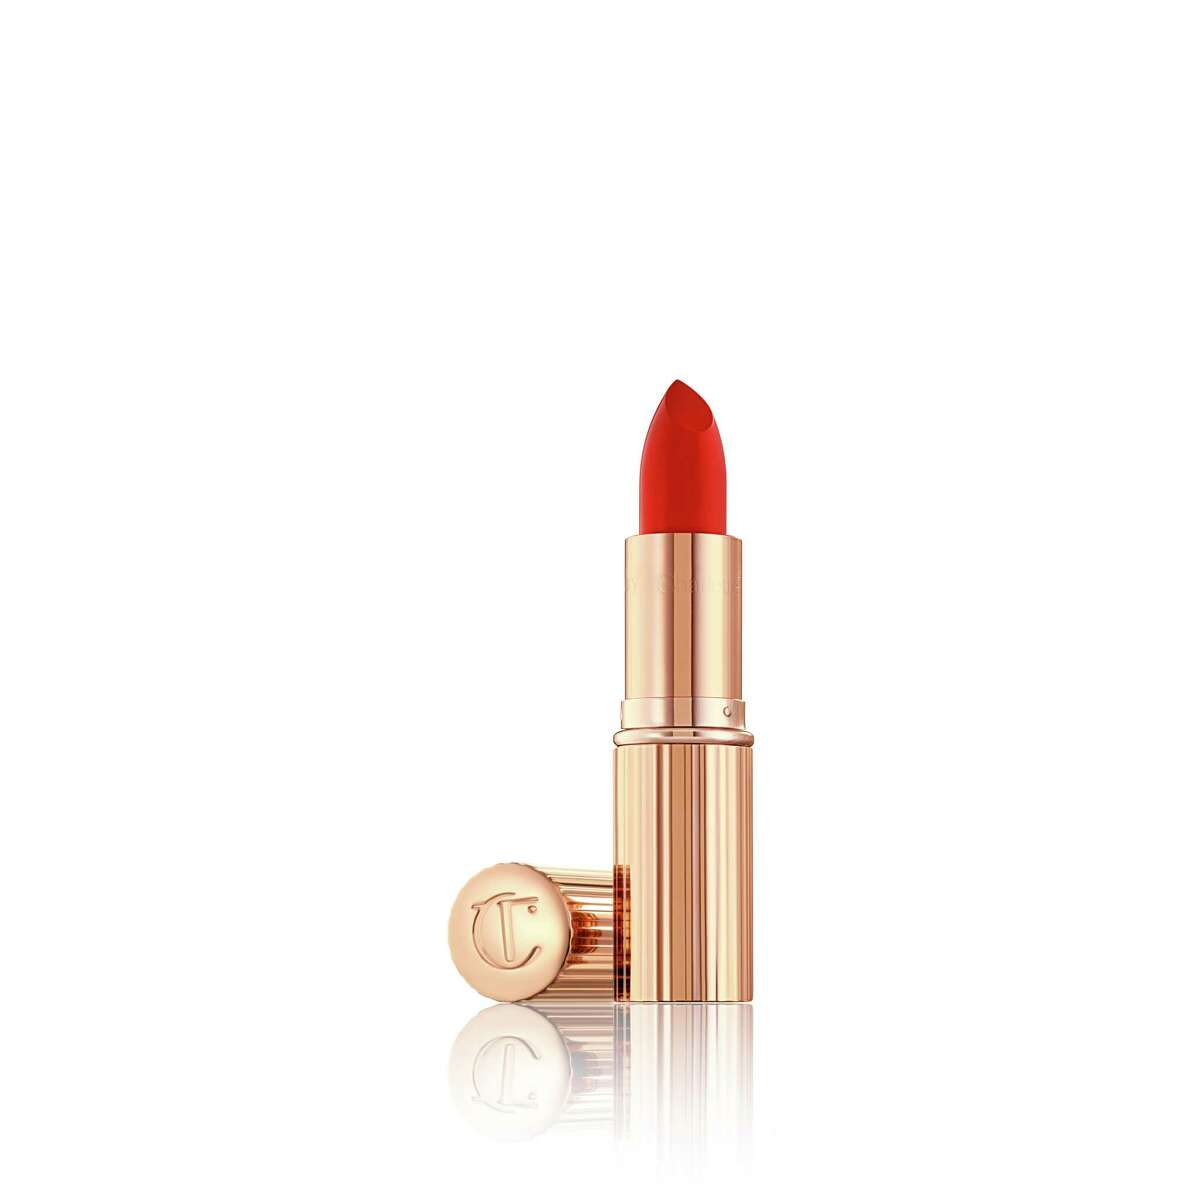 Charlotte Tilbury's K.I.S.S.I.N.G collection includes this moisturizing lipstick in "Love Bite," a bright red hue.